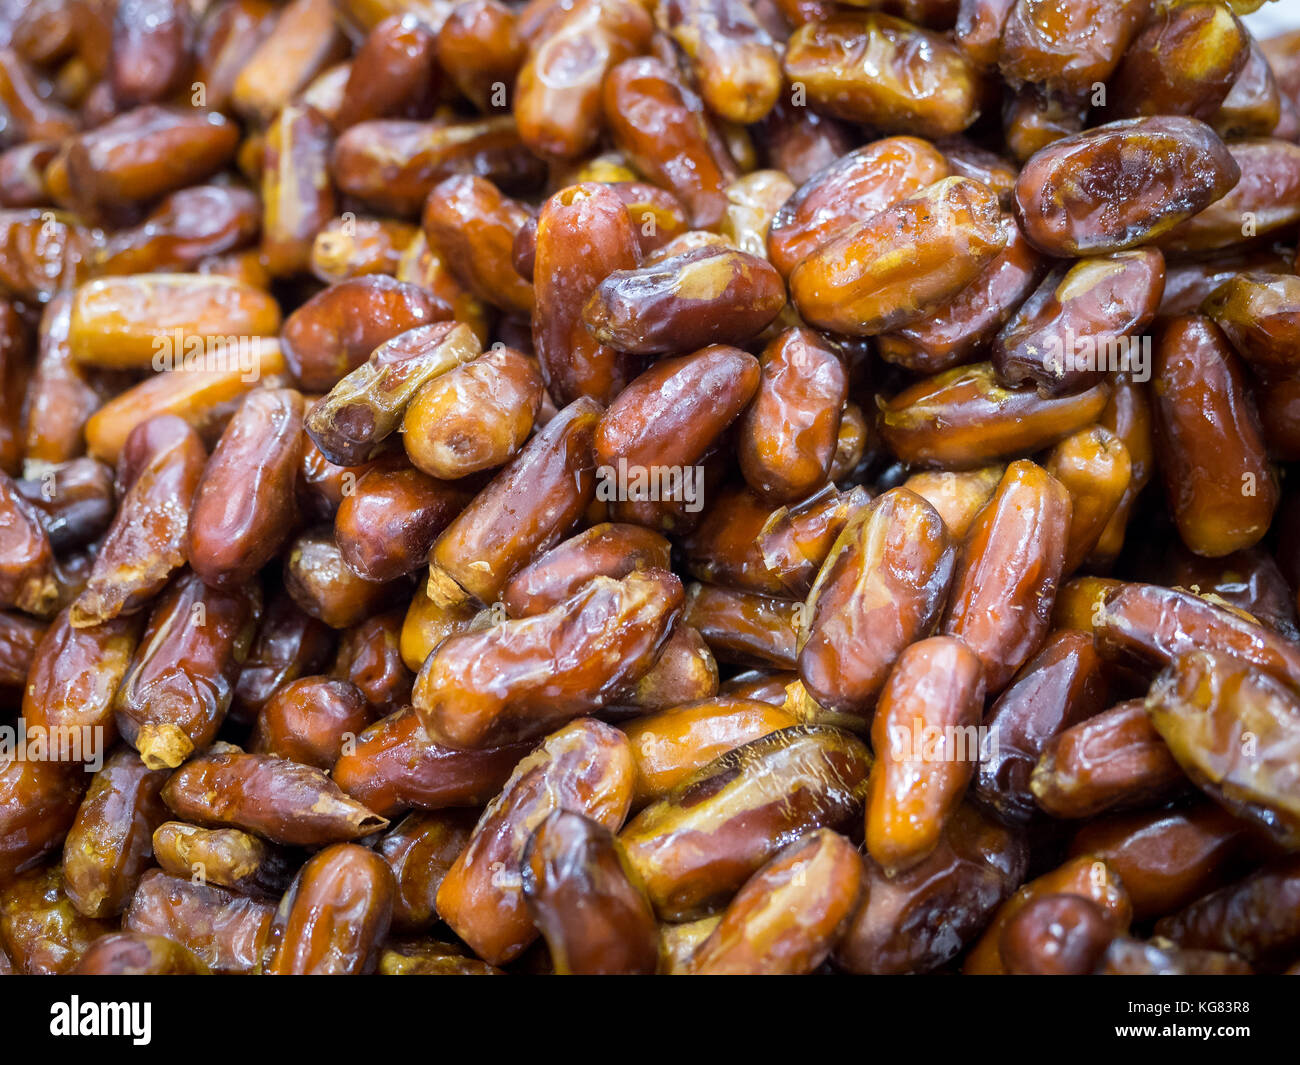 Dates close up, traditional fruit food in Oman and middle east countries Stock Photo